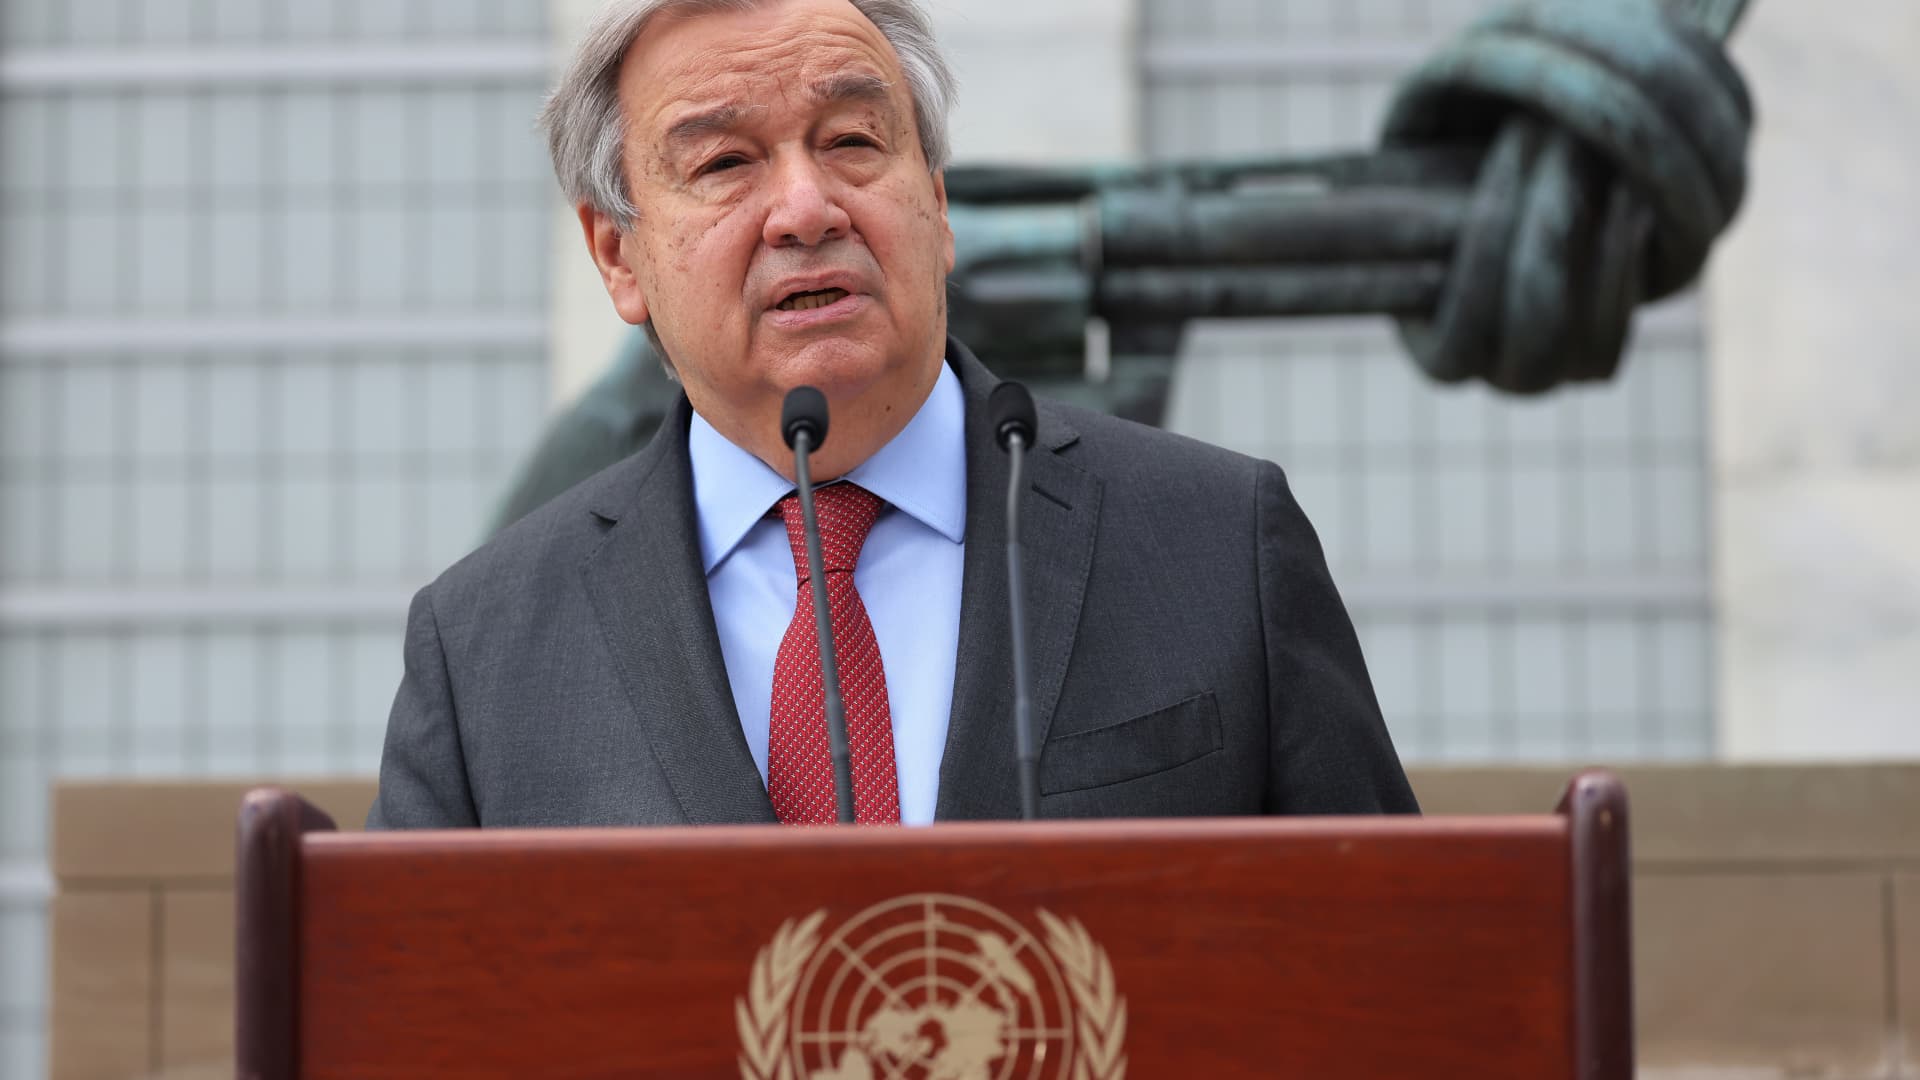 UN Secretary-General Antonio Guterres will be going to Turkey to meet President Recep Tayyip Erdogan before heading to Moscow to see President Vladimir Putin, followed by a visit to the Ukrainian capital of Kyiv.